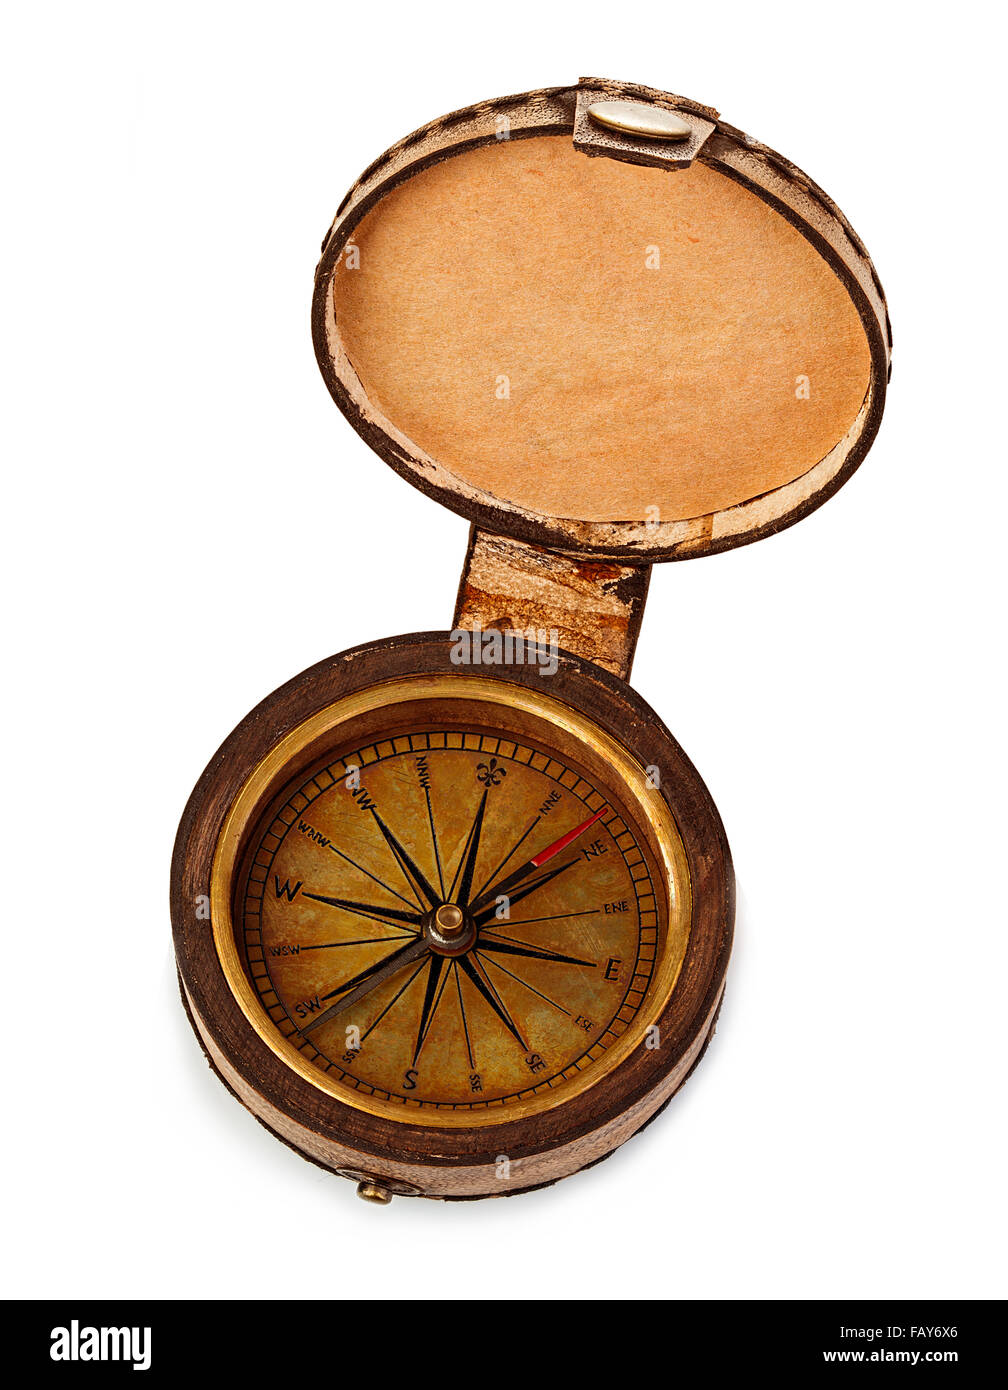 Vintage copper compass in a leather case isolated on a white background. Stock Photo